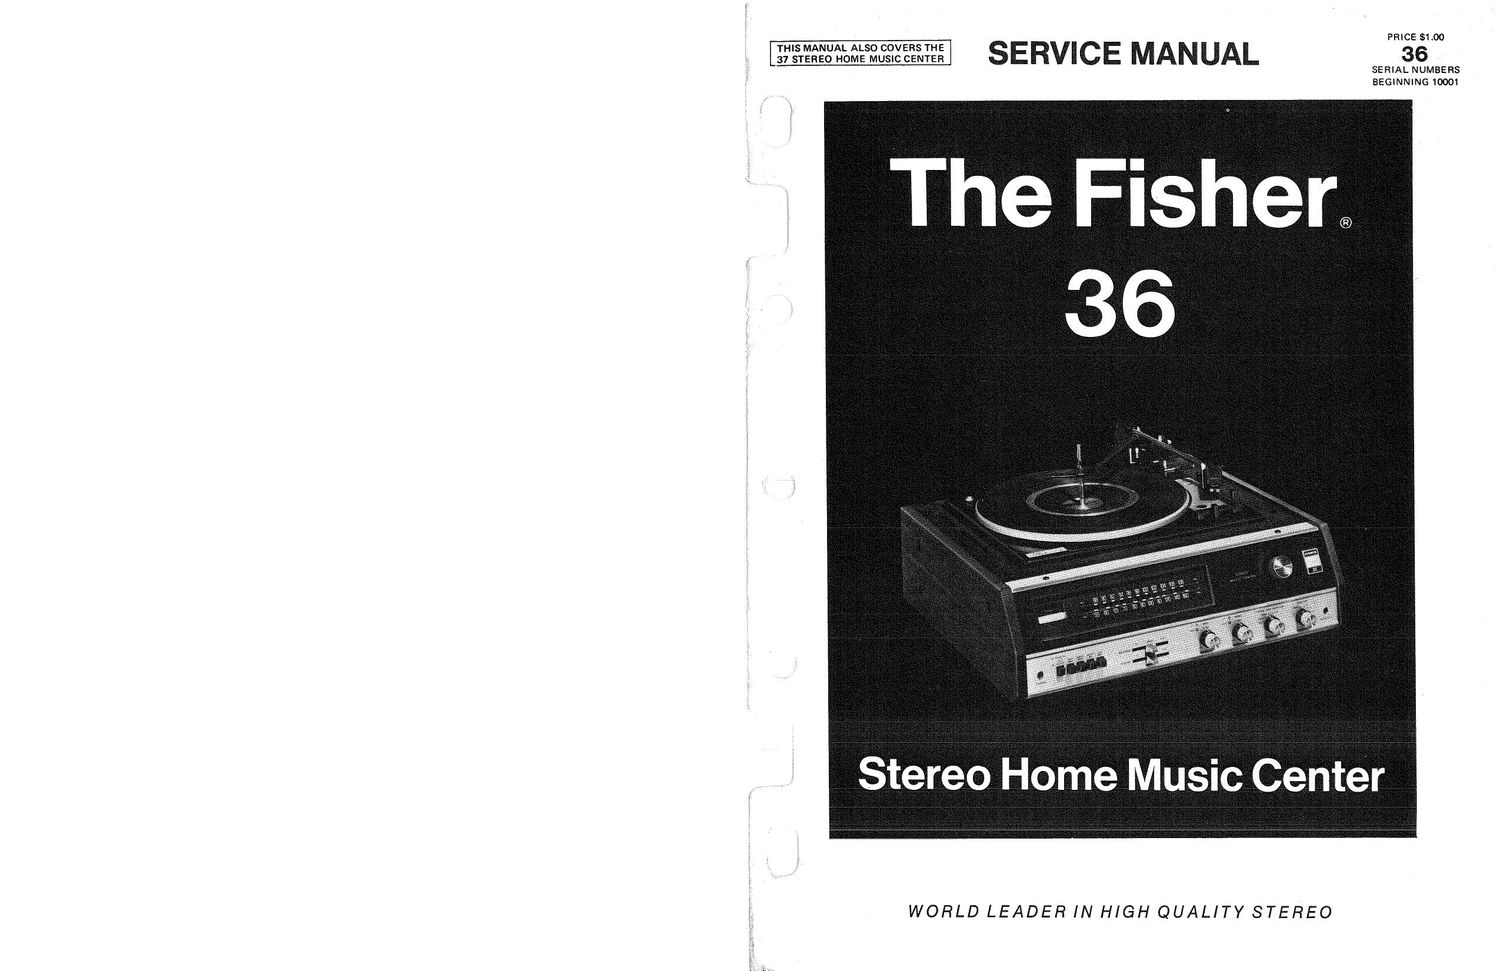 Fisher 36 Service Manual